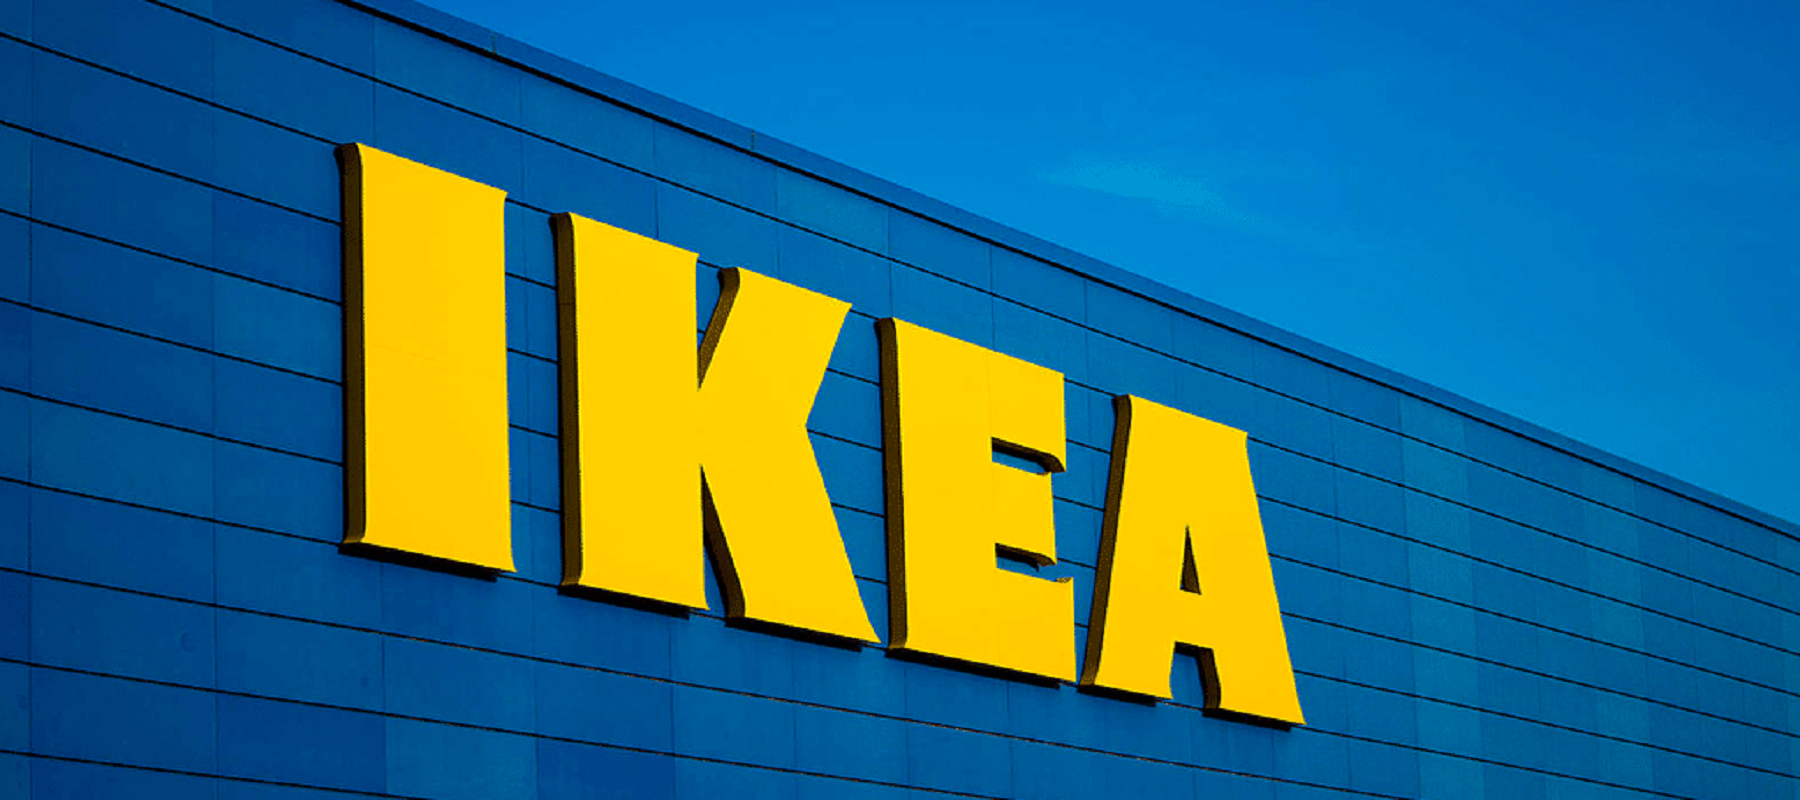 IKEA partners with WWF to address forest degradation in Colombia and Brazil